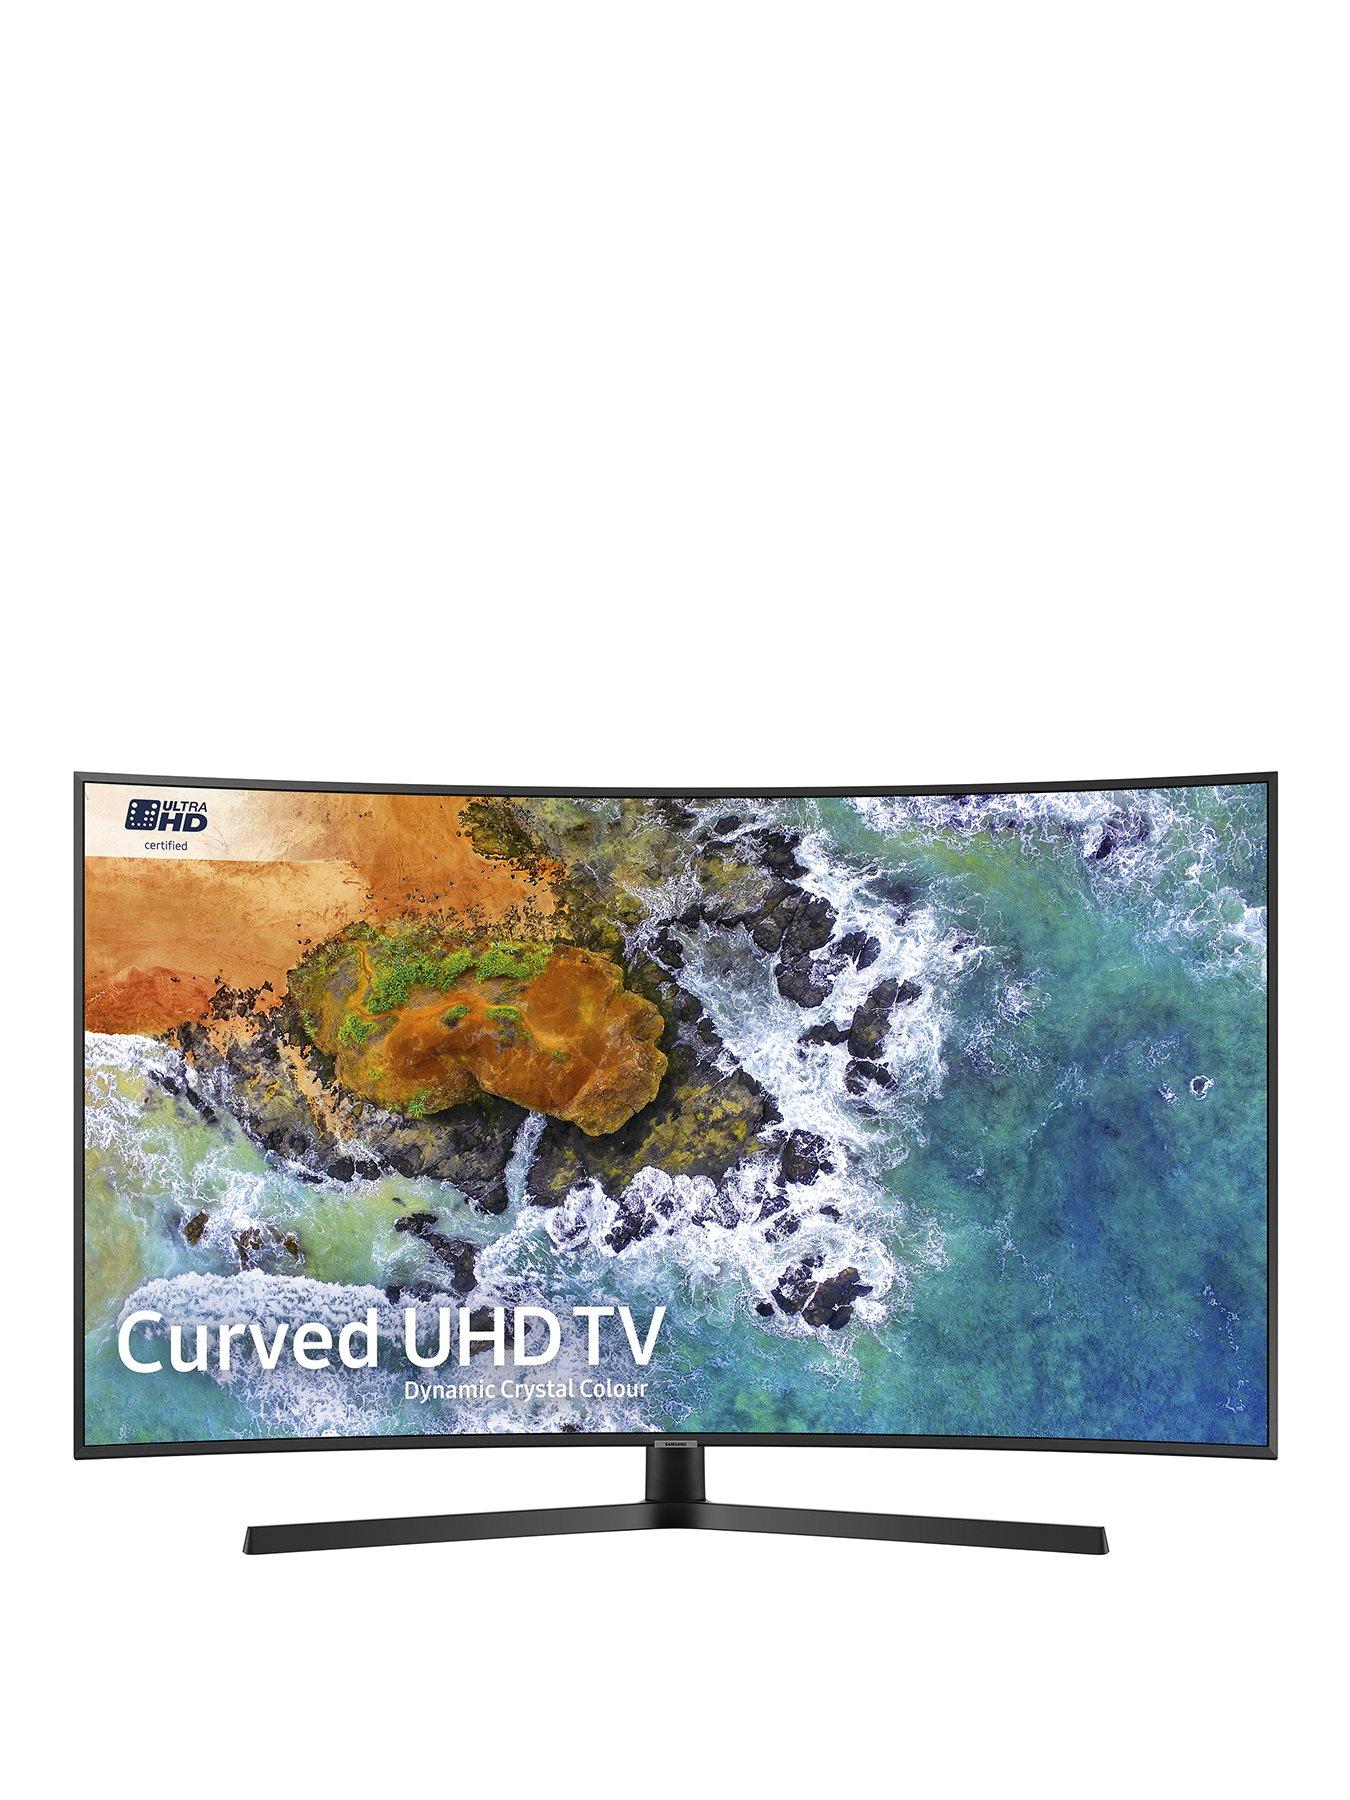 Samsung Ue49Nu7500 49 Inch Curved Dynamic Crystal Colour, Ultra Hd 4K Certified, Hdr, Smart Tv